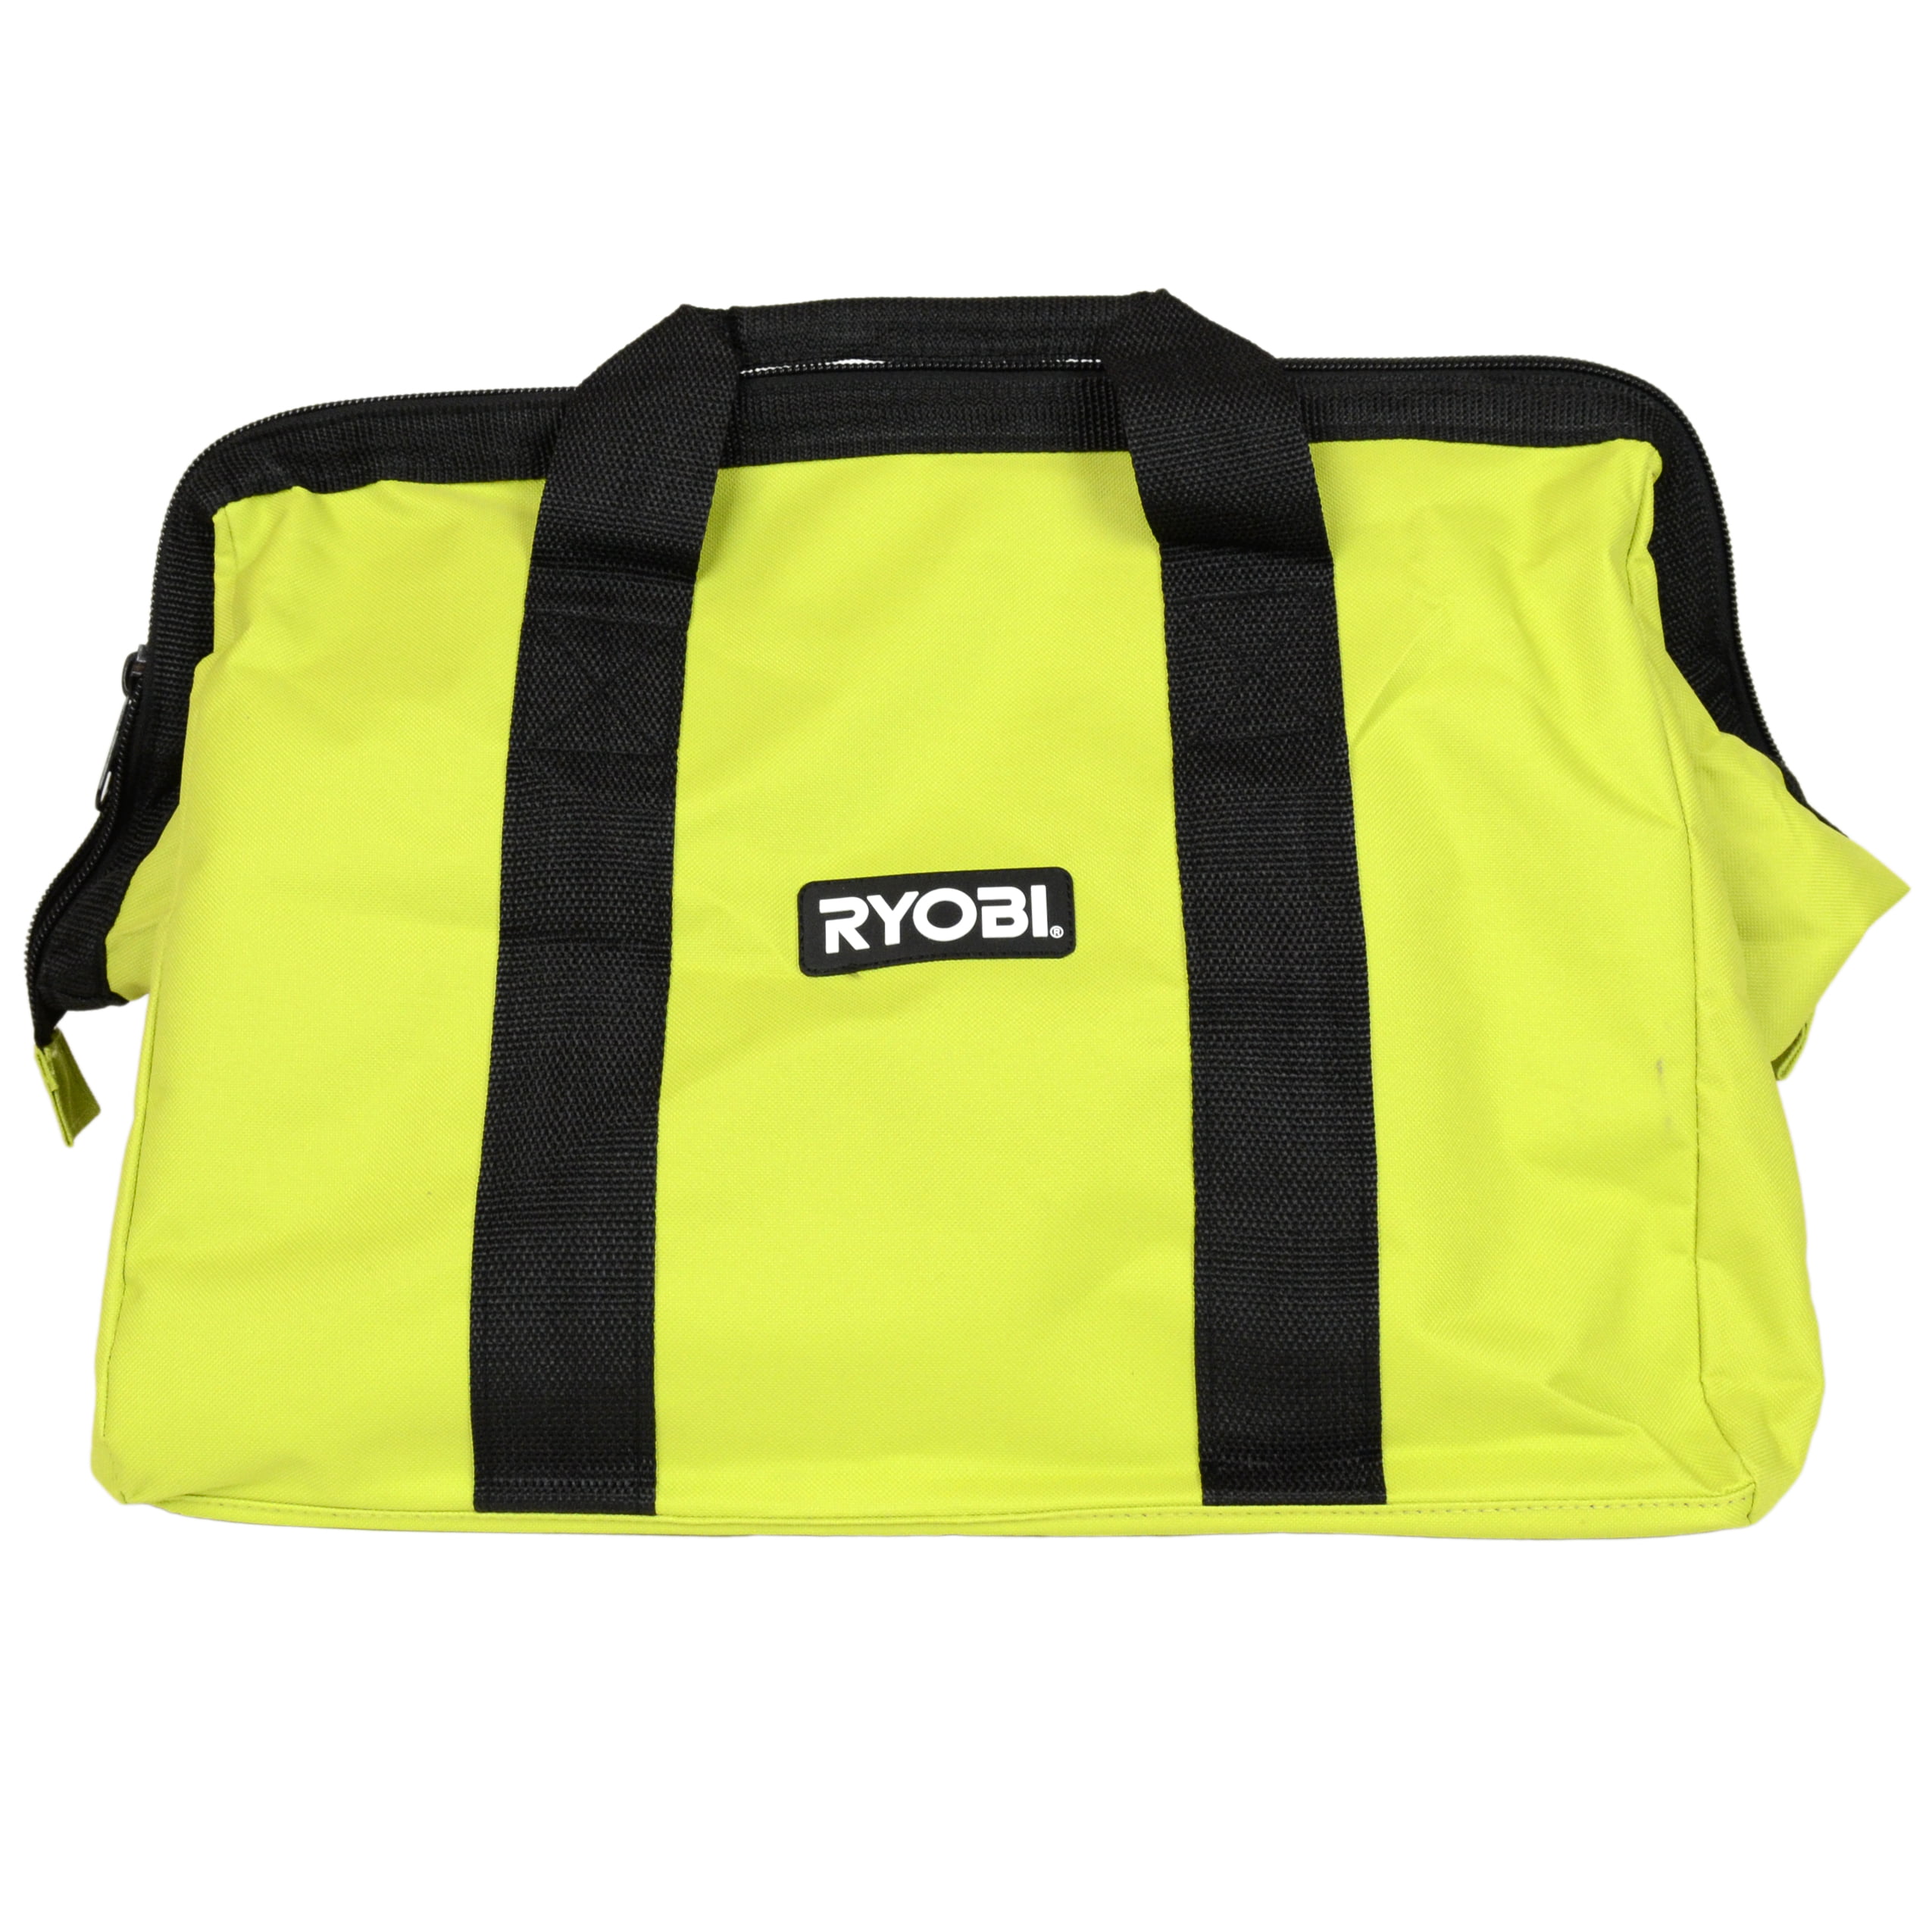 New HUSKY Tough 12 in Tool Carry Bag Contractor Plumber Electrician w/RYOBI Bits 